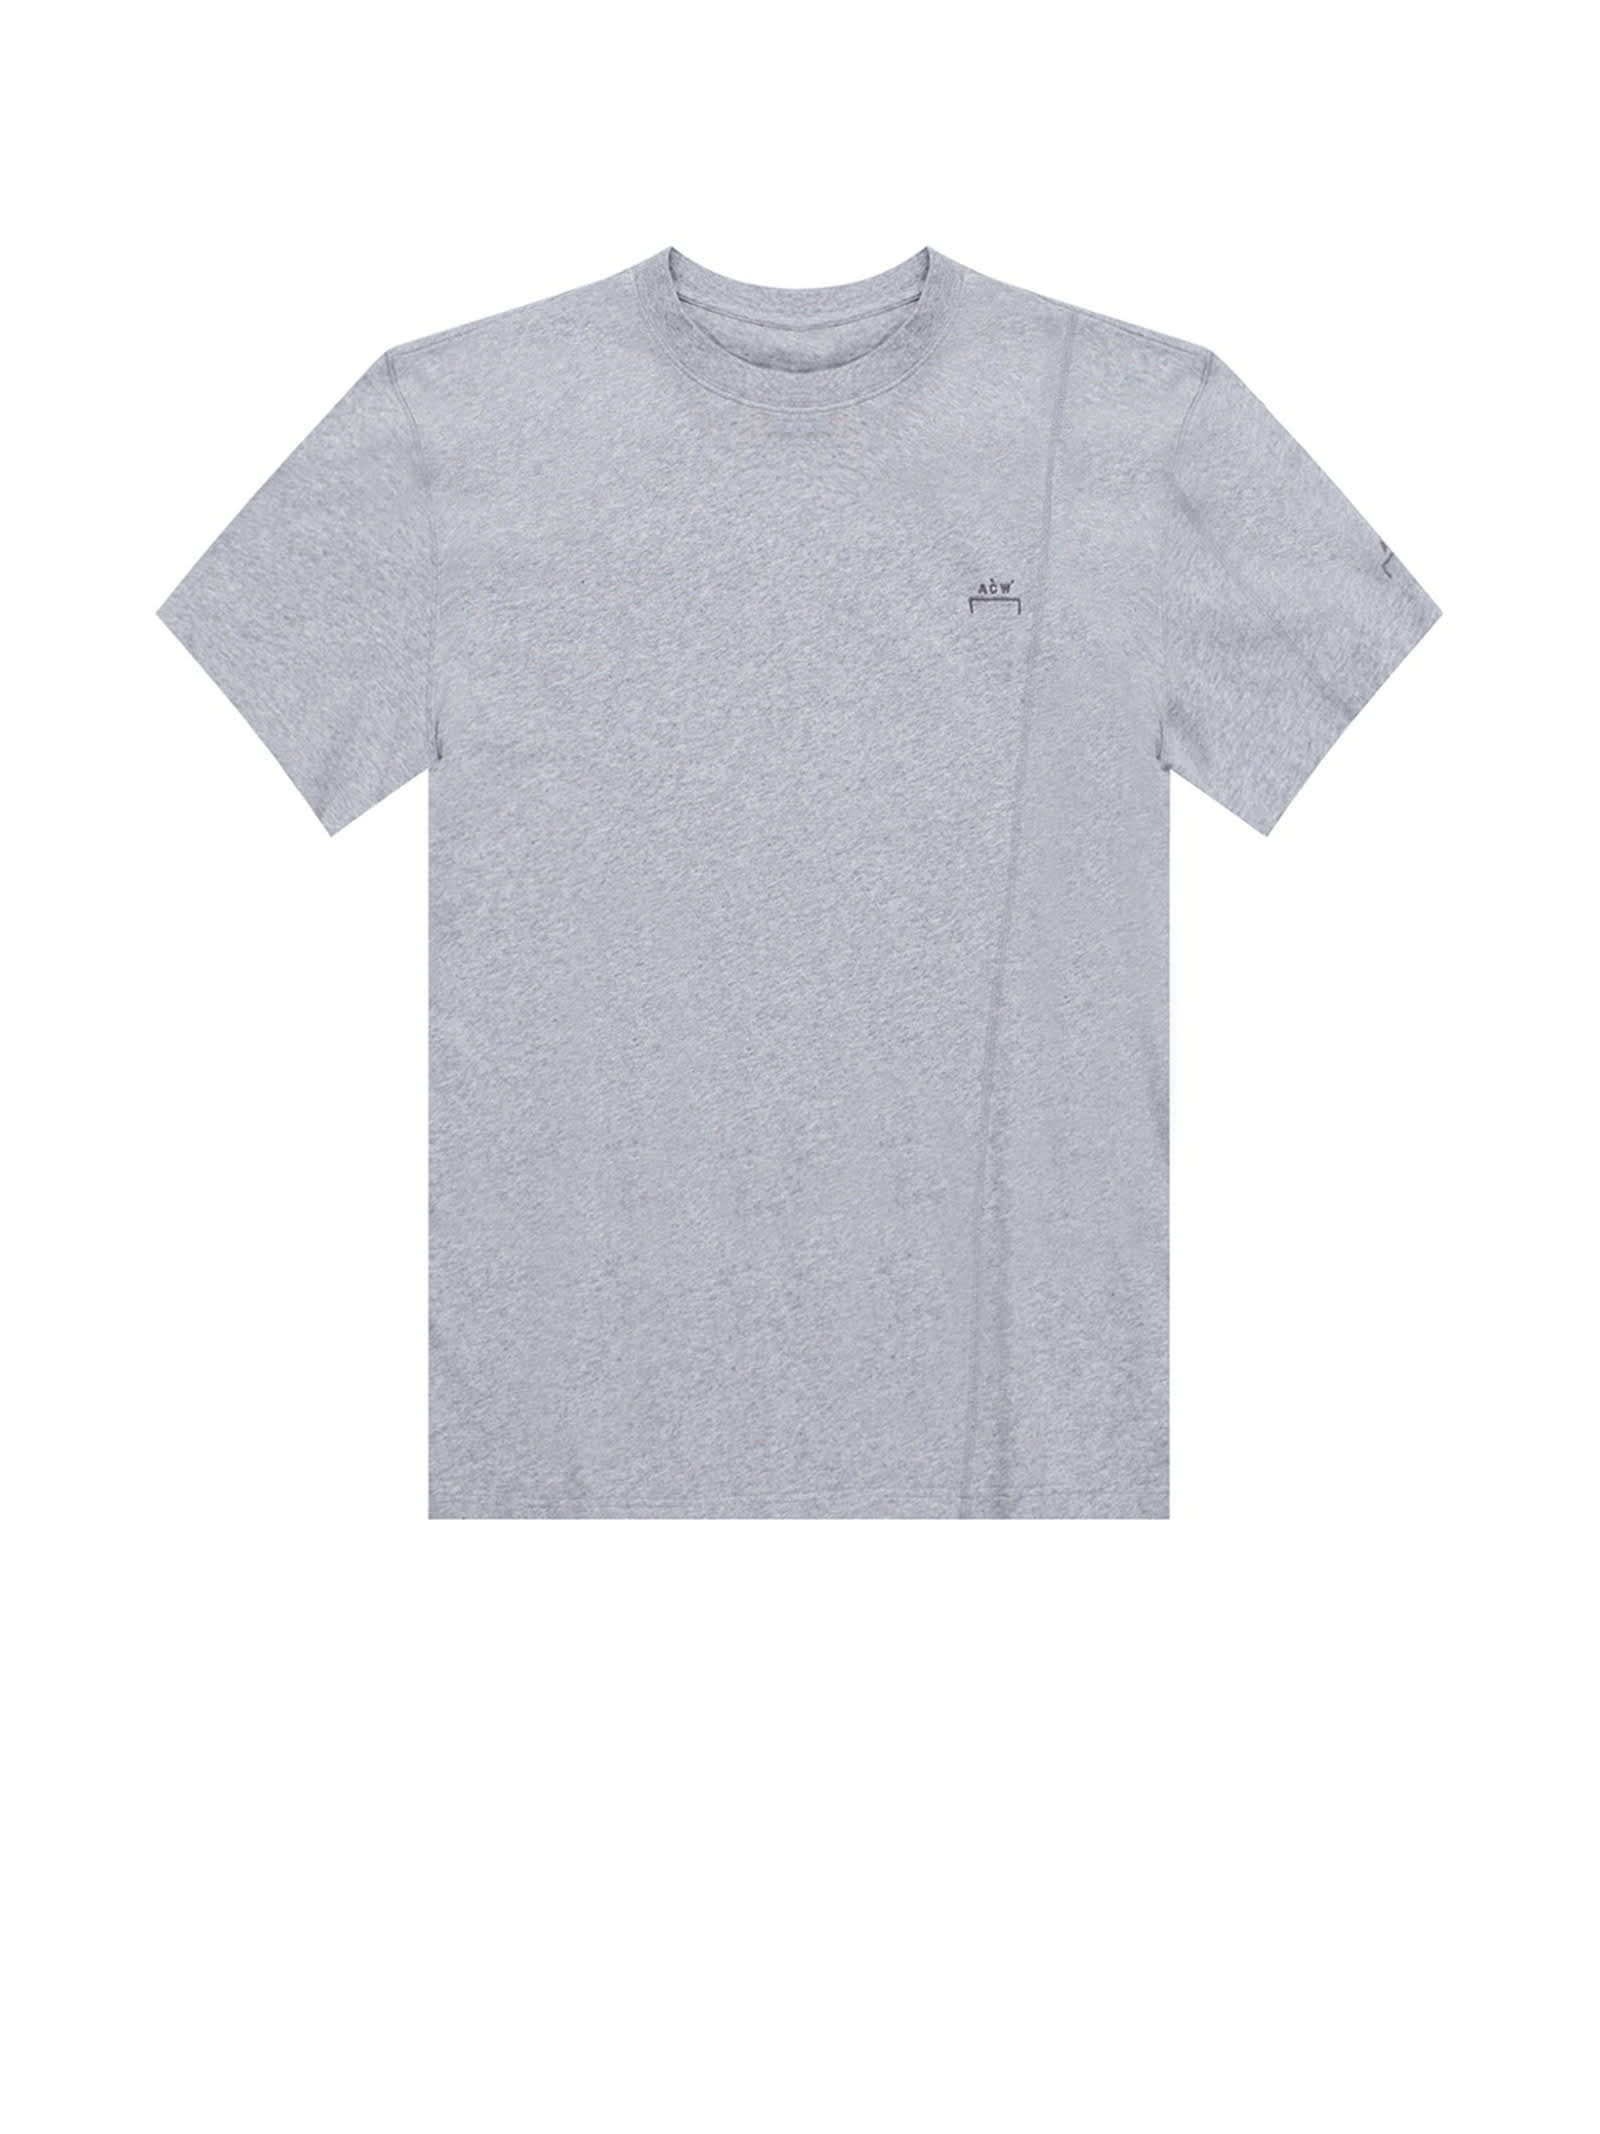 A-COLD-WALL A Cold Wall Grey T-shirt